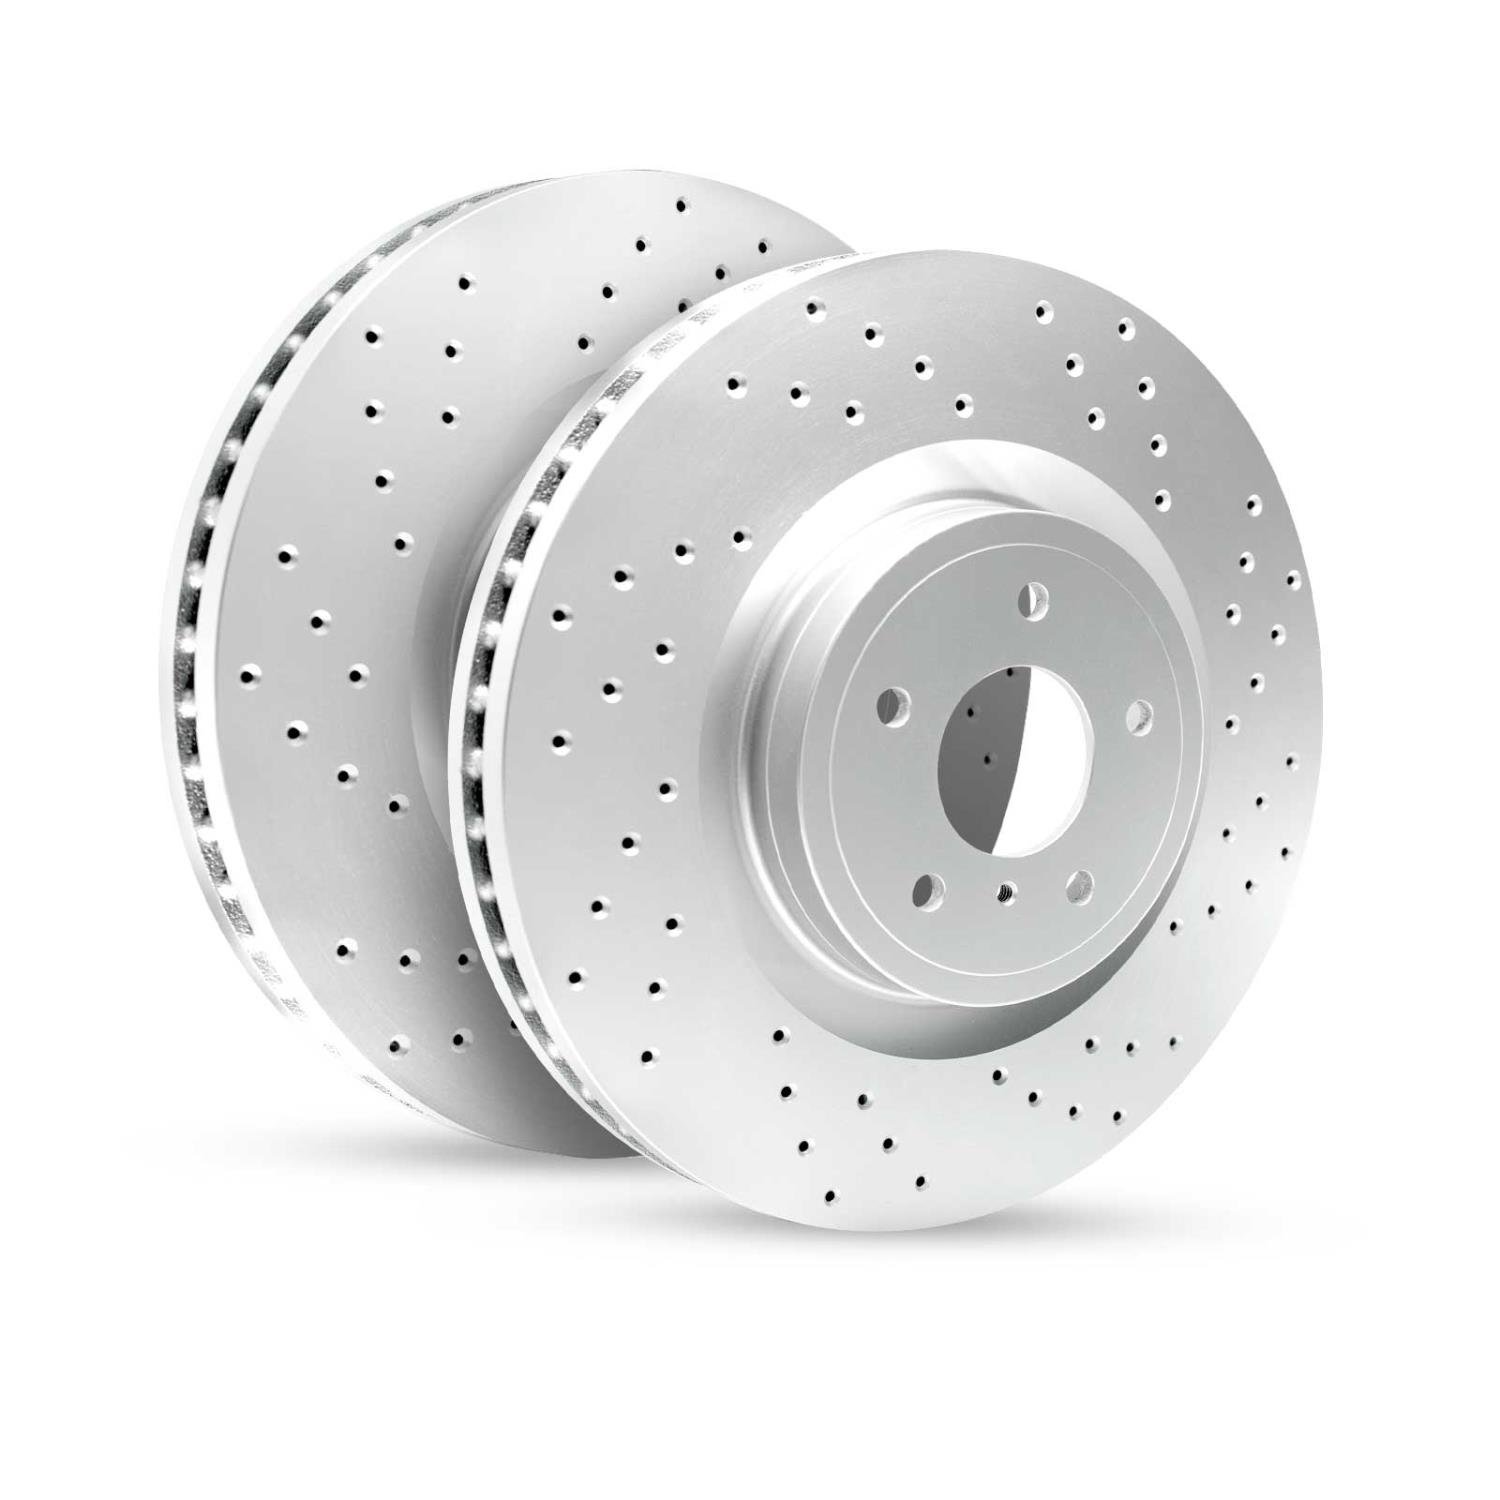 GEO-Carbon Drilled & Slotted Brake Rotor Set, 1992-2000 Lexus/Toyota/Scion, Position: Rear